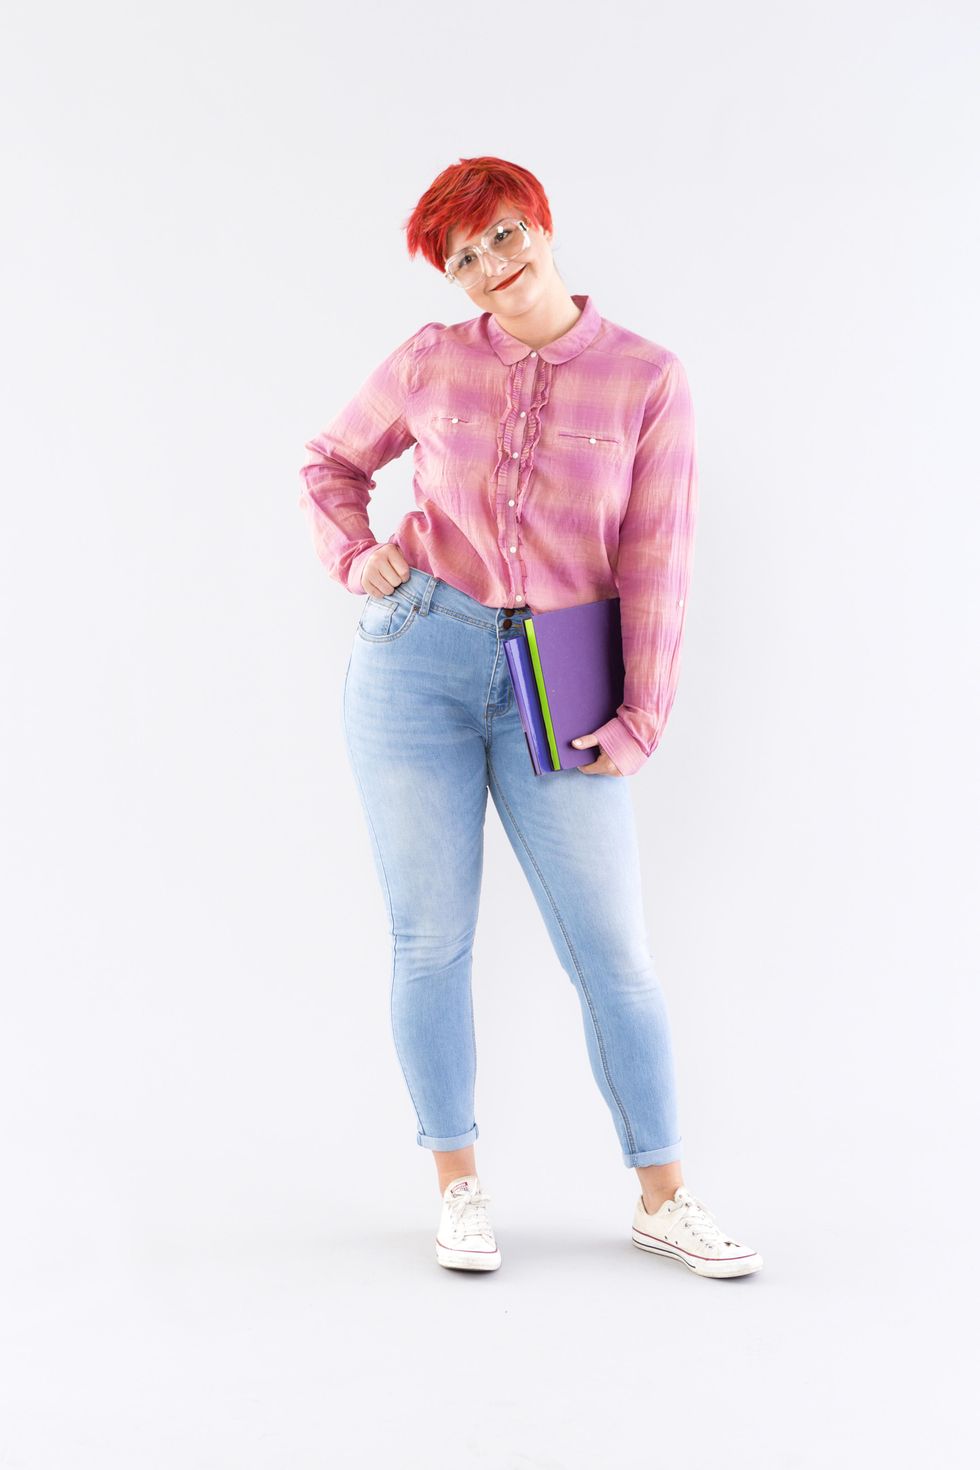 Barb of 'Stranger Things' Halloween Costume: How to Get The Look Down